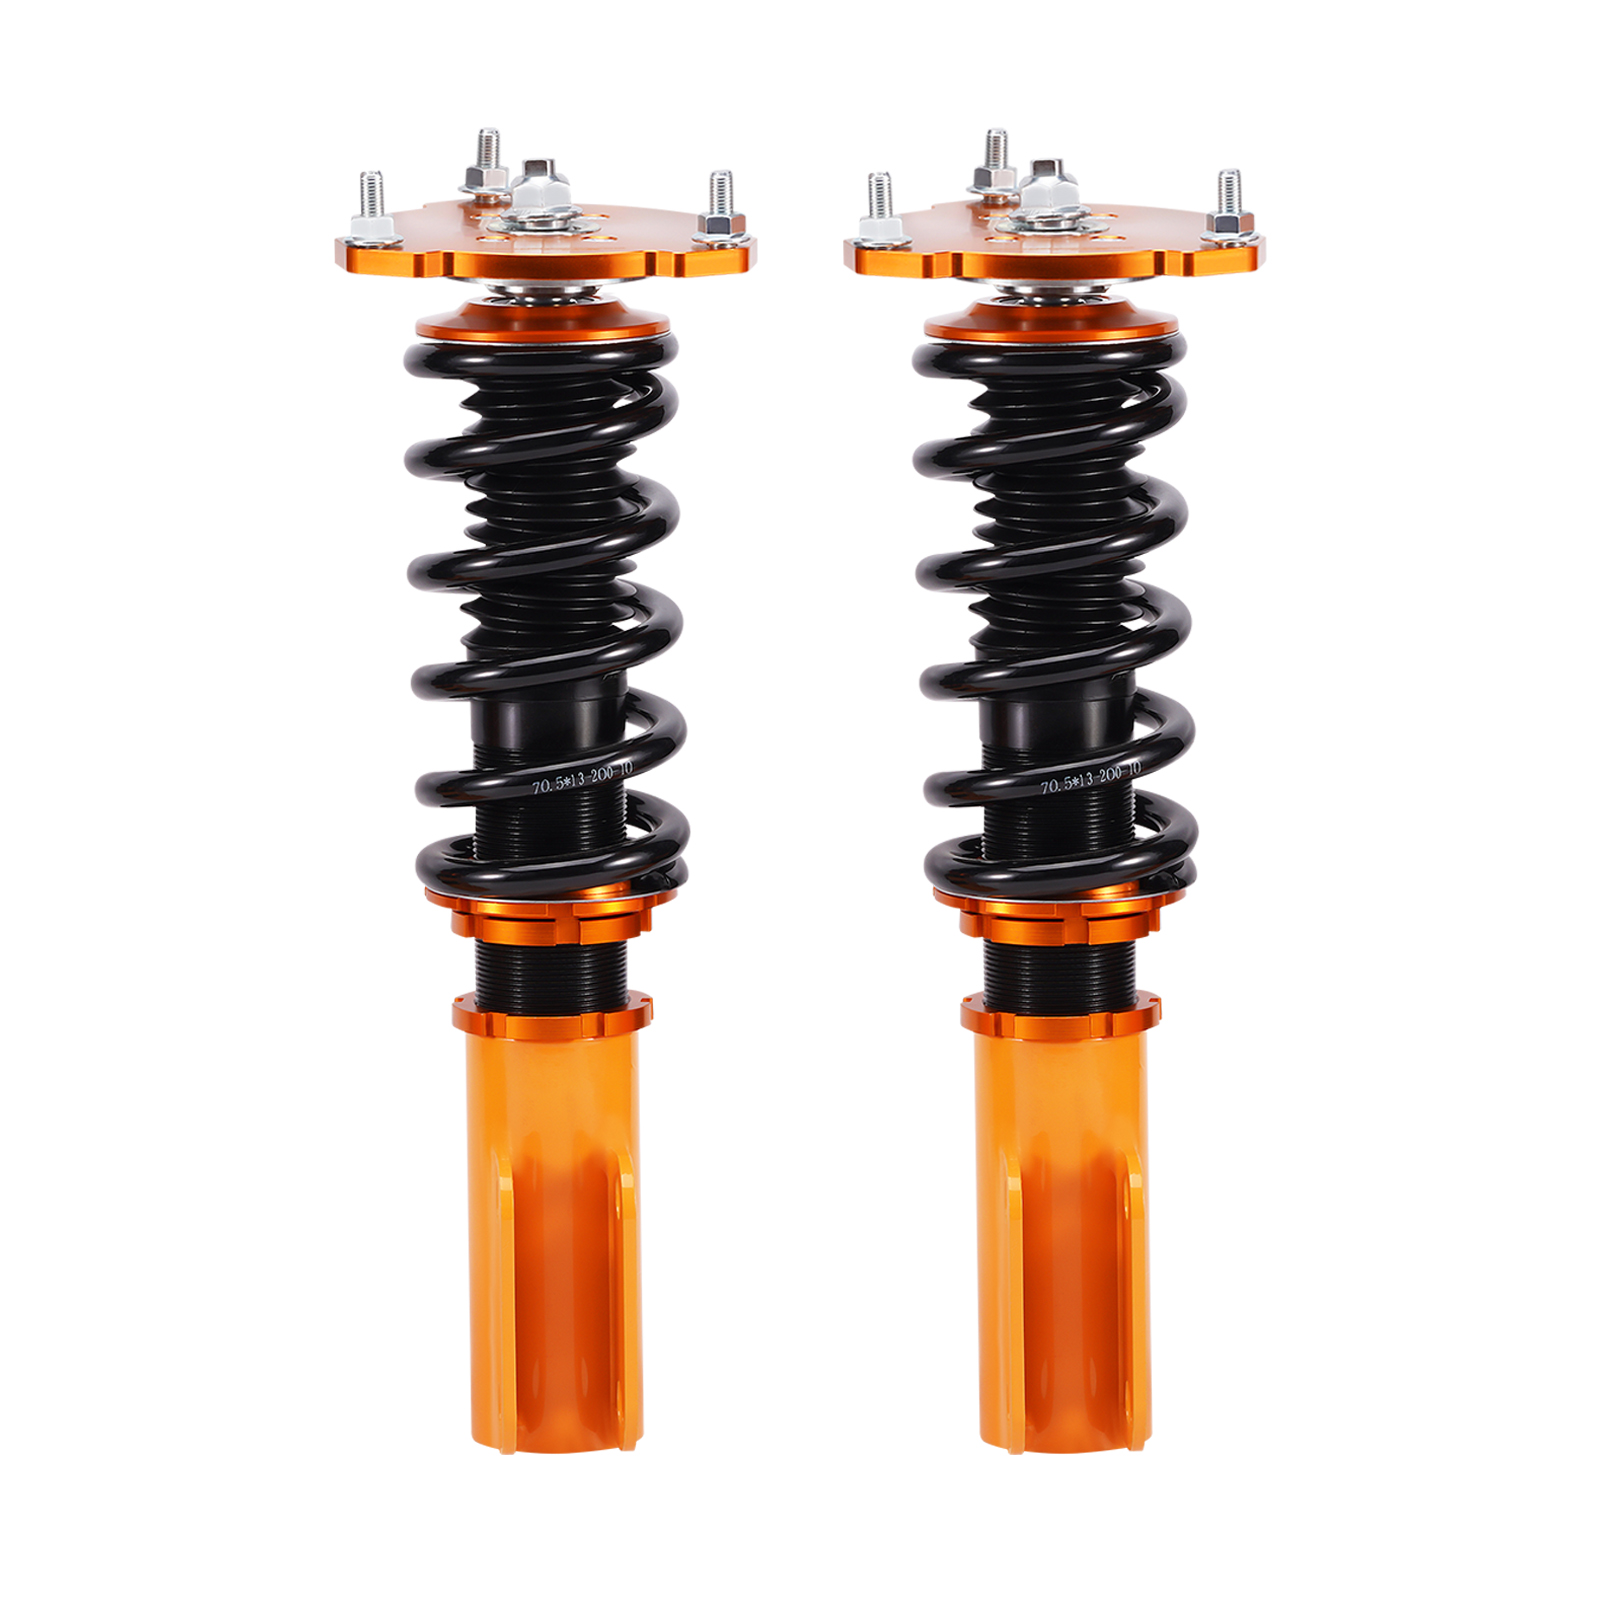 Front Struts Coil Spring Shock Coilovers For Buick Regal 97-04 / Century 97-05